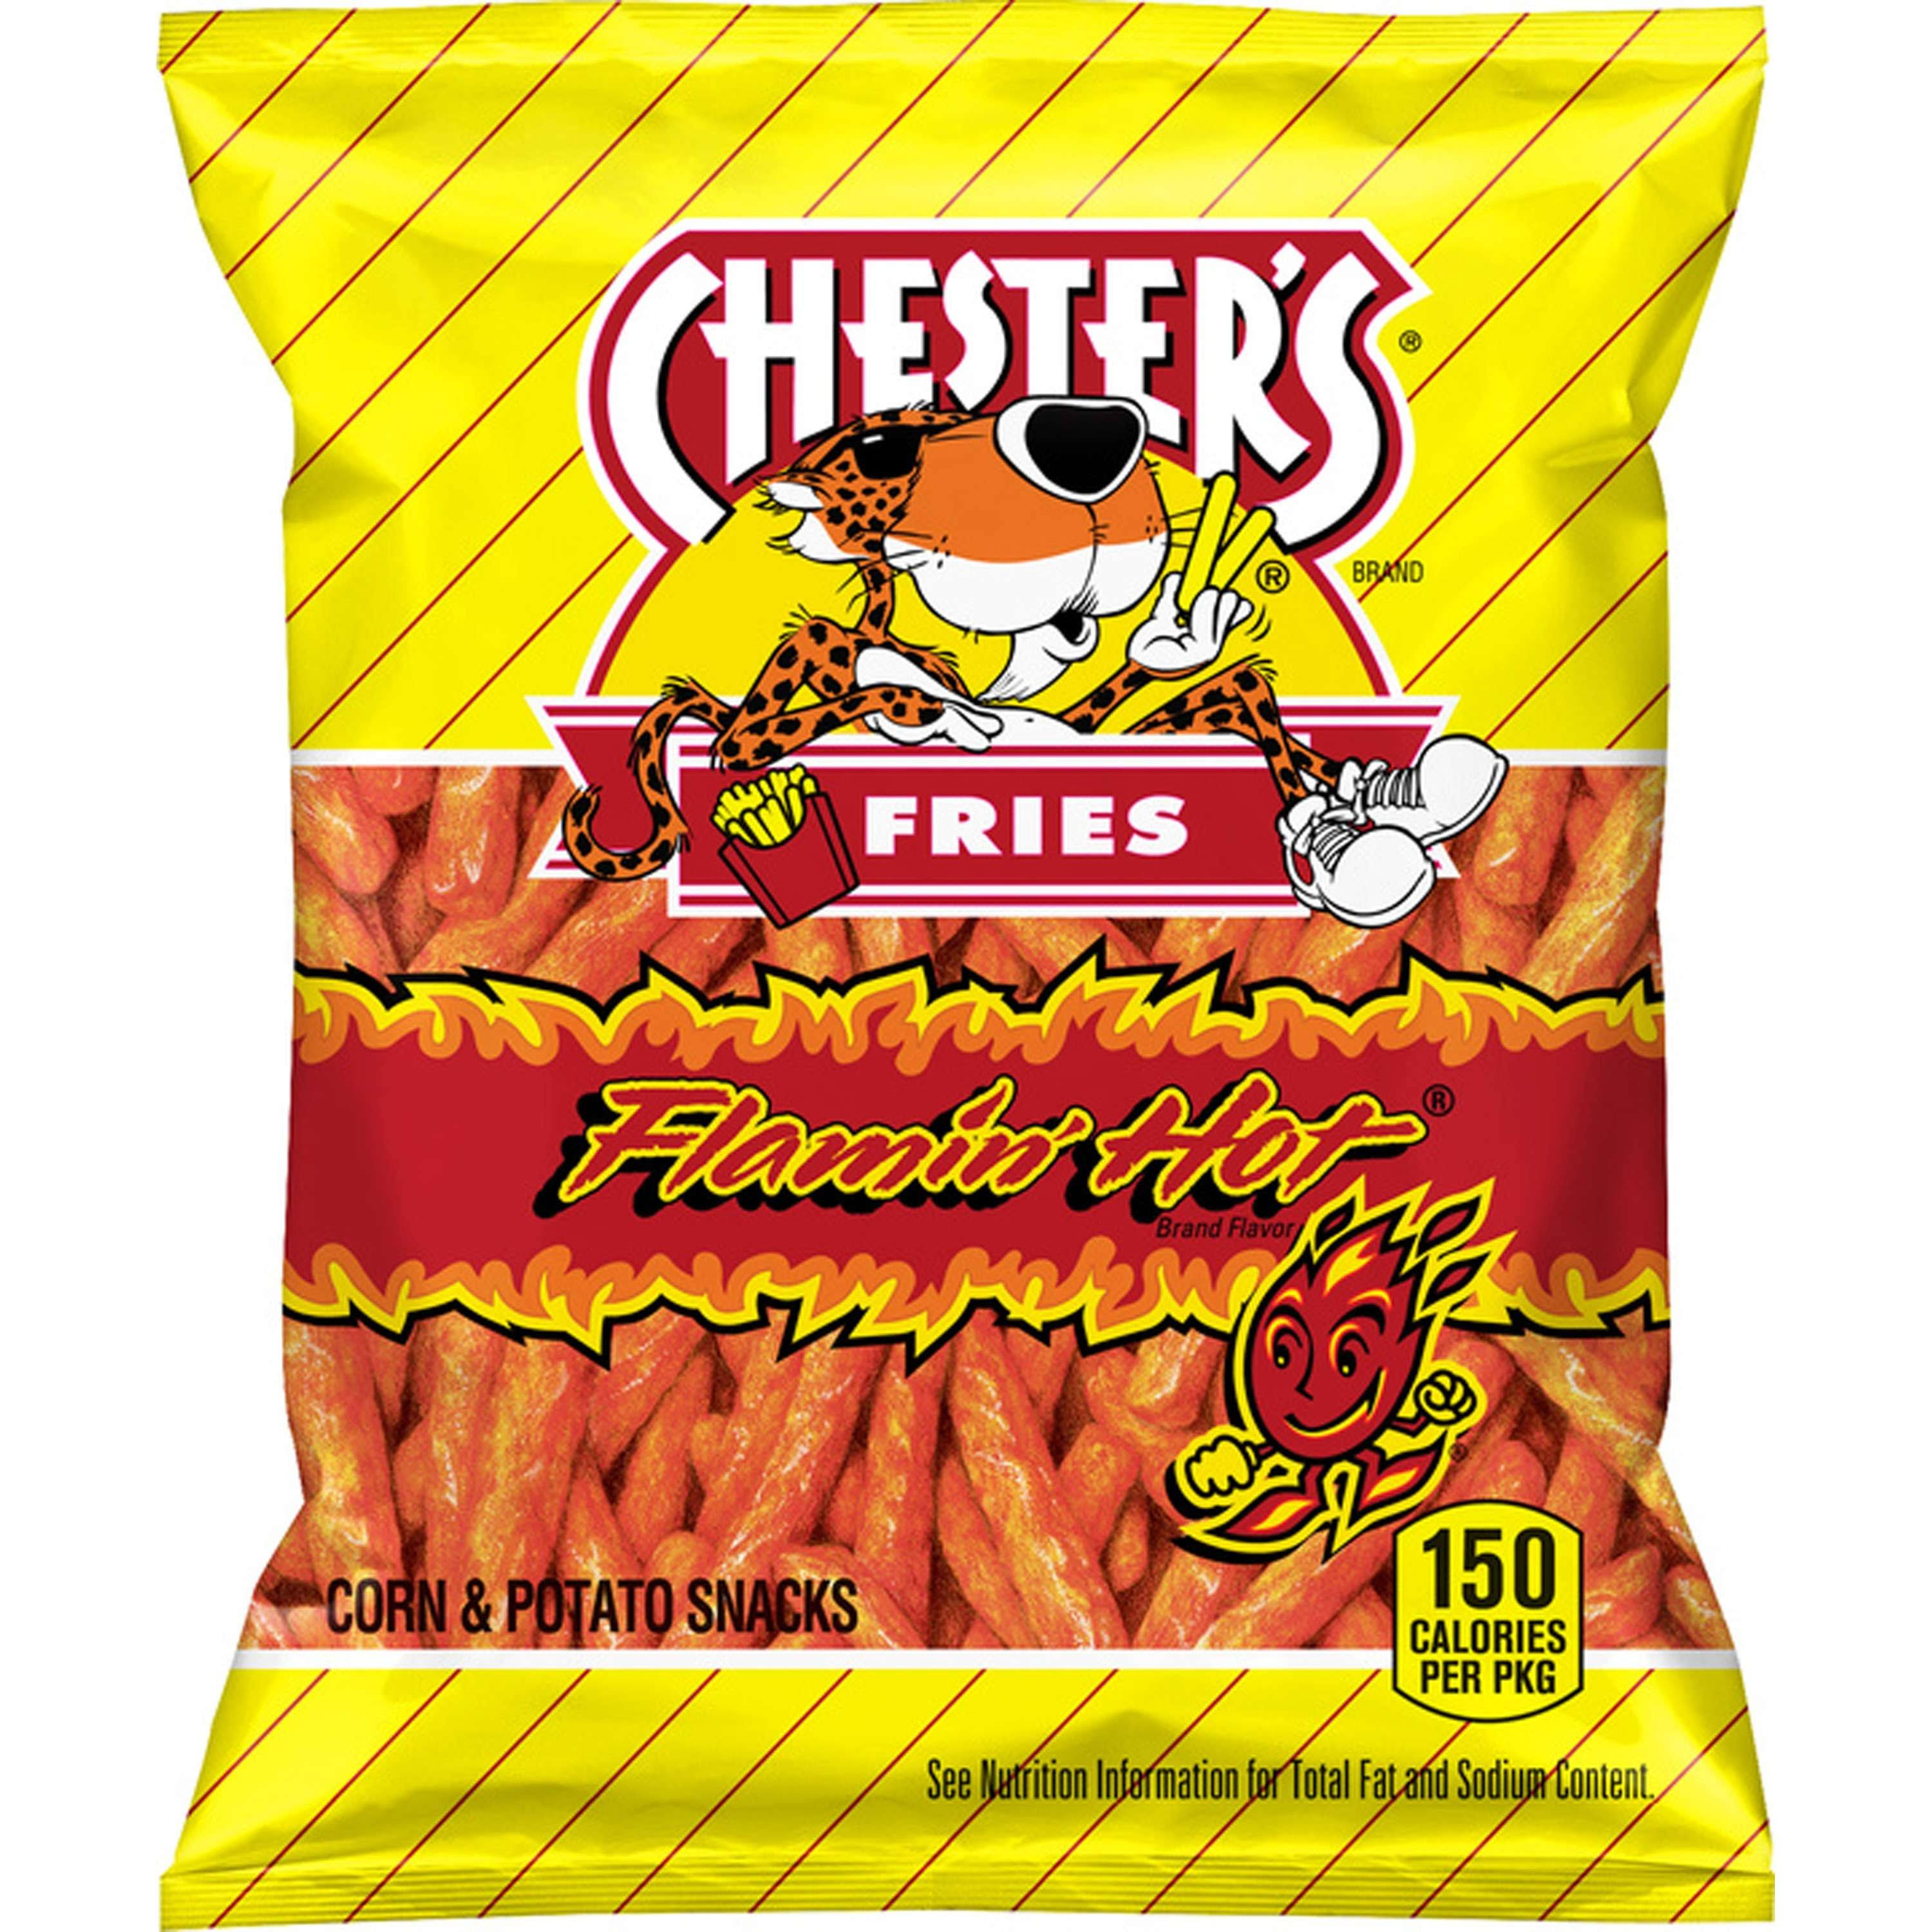 Chester's Flamin' Hot Fries